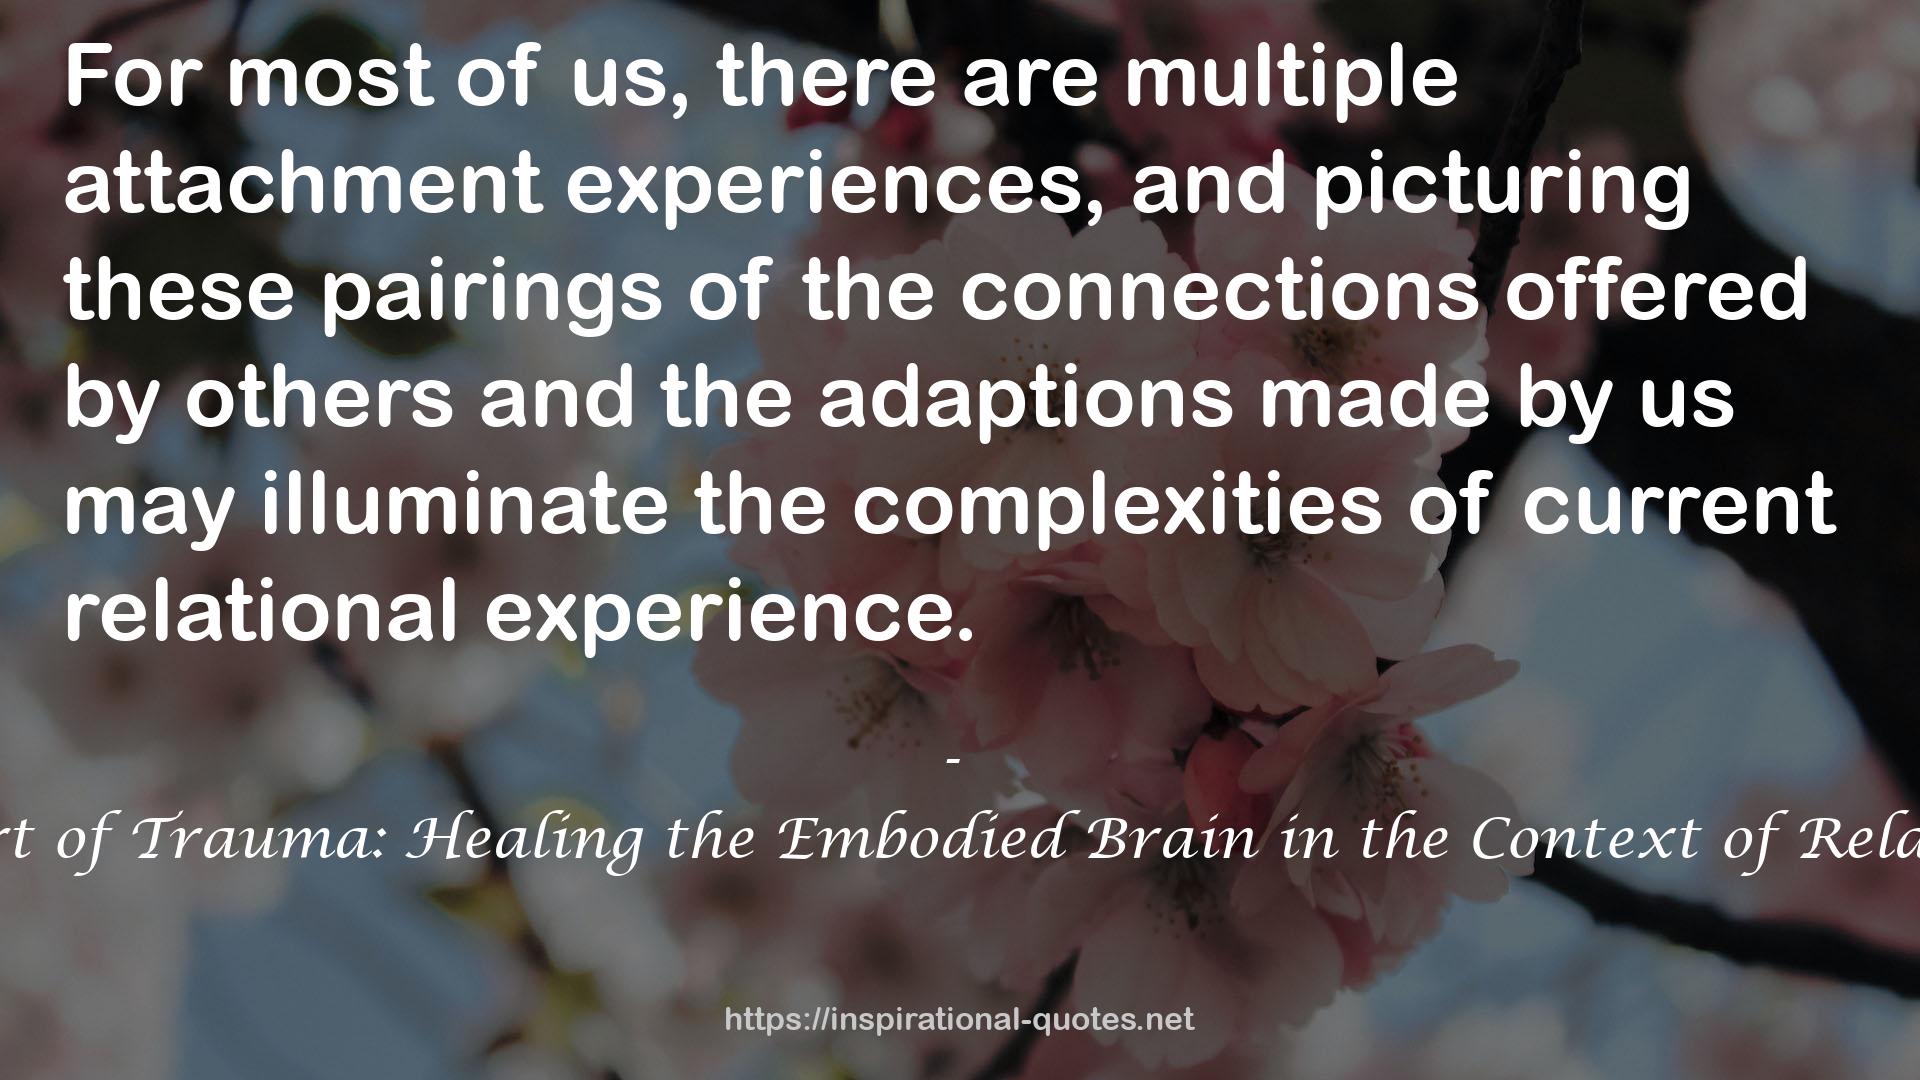 The Heart of Trauma: Healing the Embodied Brain in the Context of Relationships QUOTES